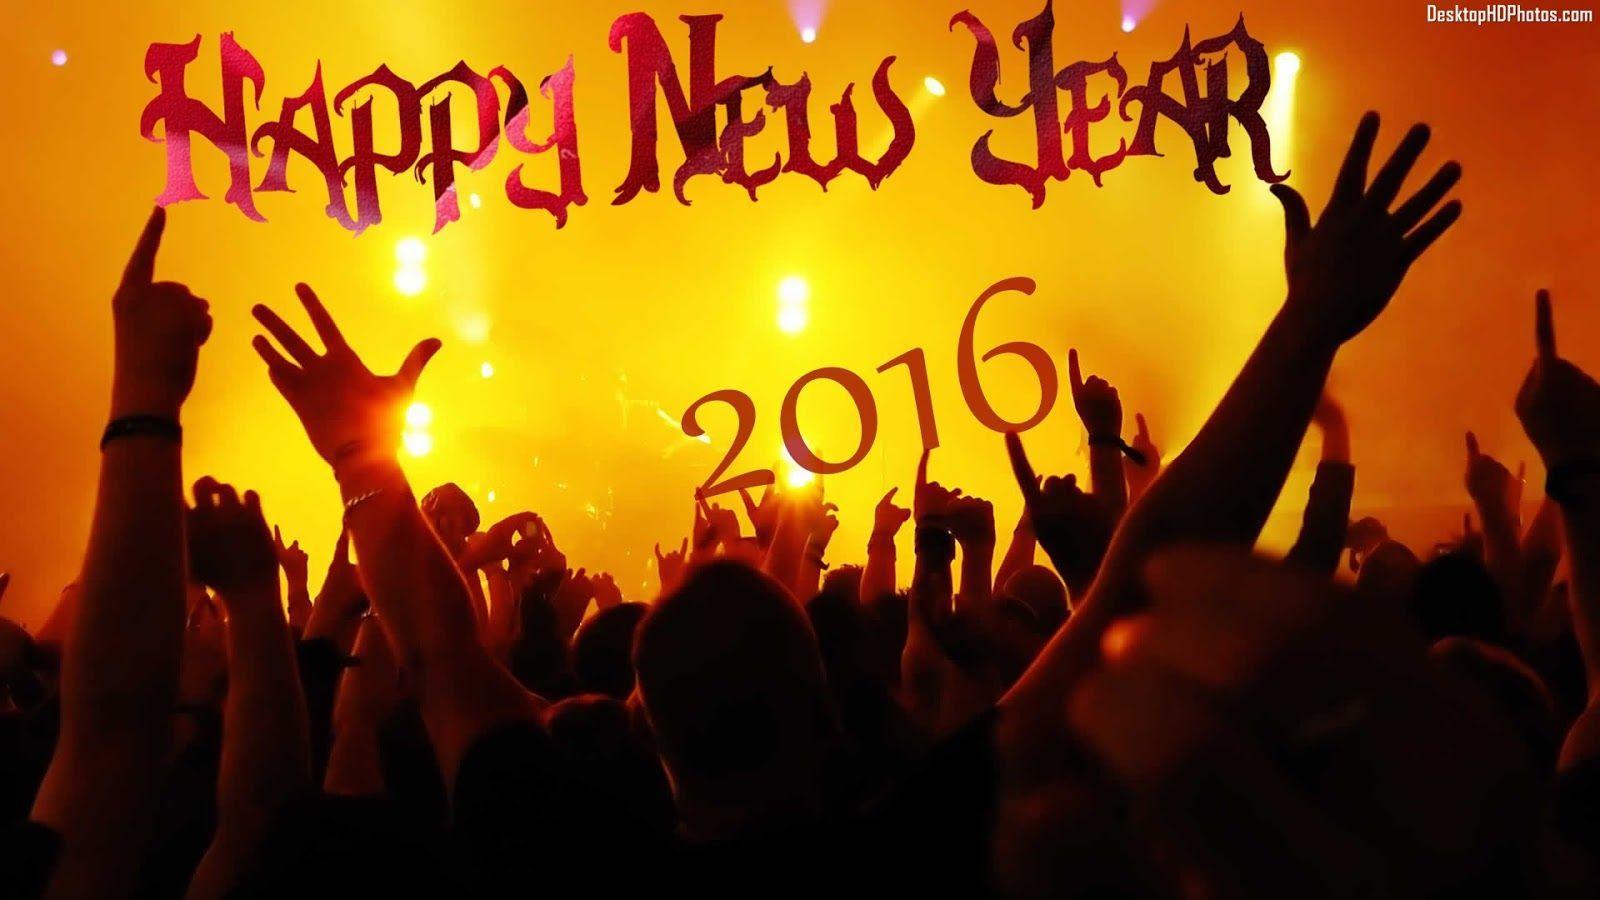 Download} Happy New Year 2016 HD Wallpaper 1080p Free